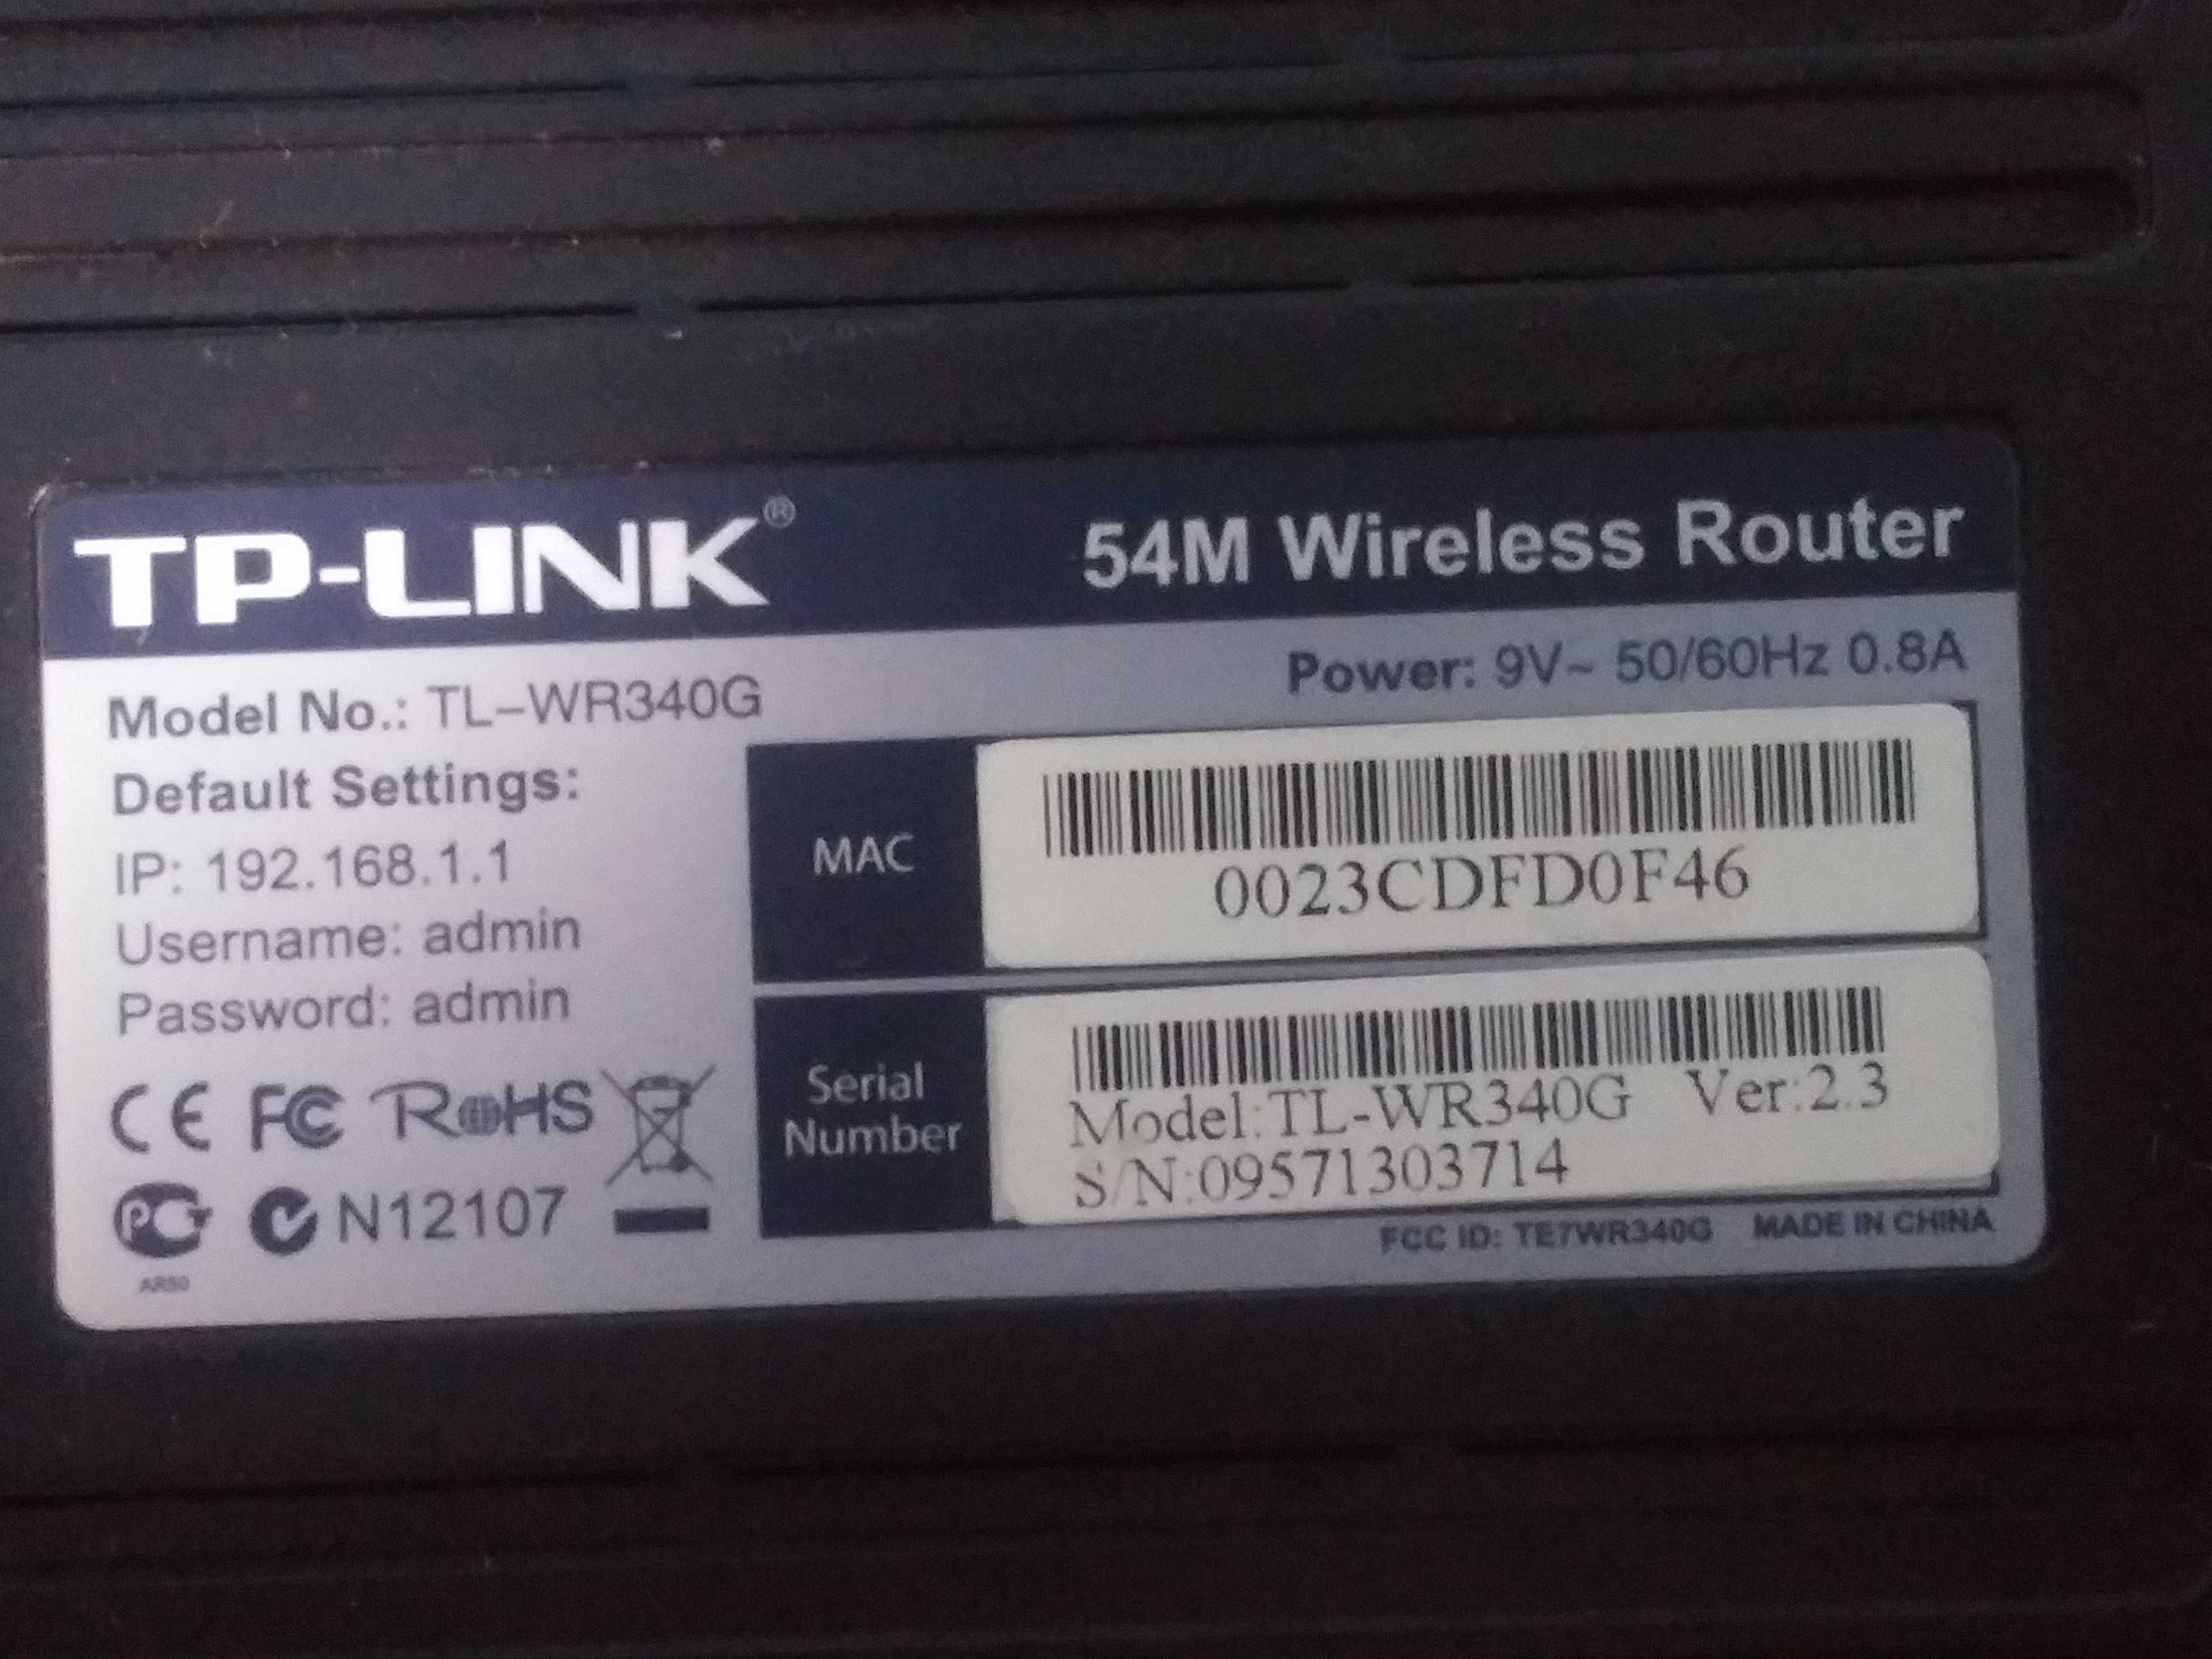 Wireless xDSL Router: TP-Link TL-WR340G built-in 4-port switch